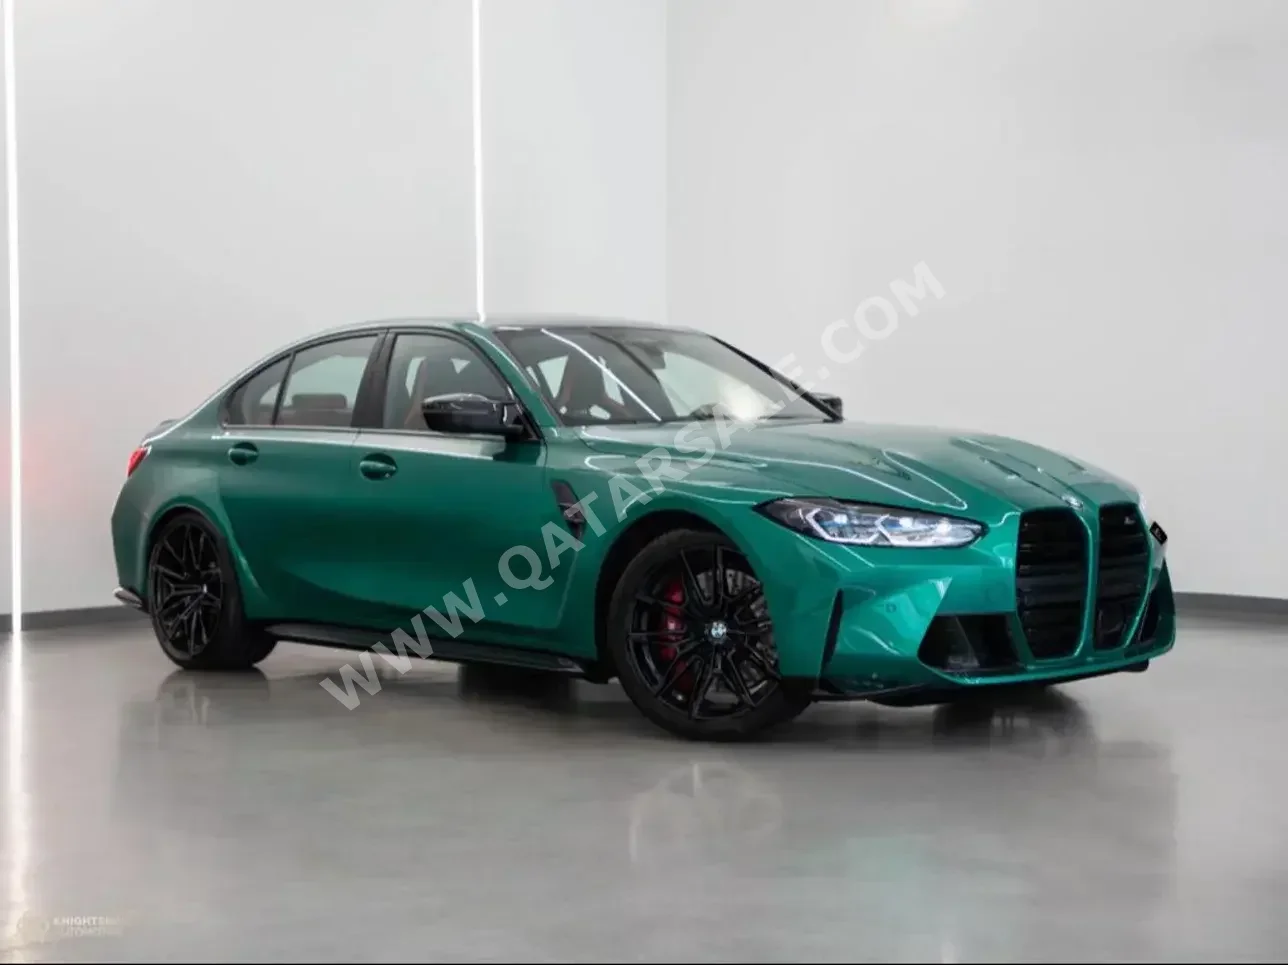  BMW  M-Series  3 Competition  2021  Automatic  17,000 Km  6 Cylinder  Rear Wheel Drive (RWD)  Coupe / Sport  Green  With Warranty